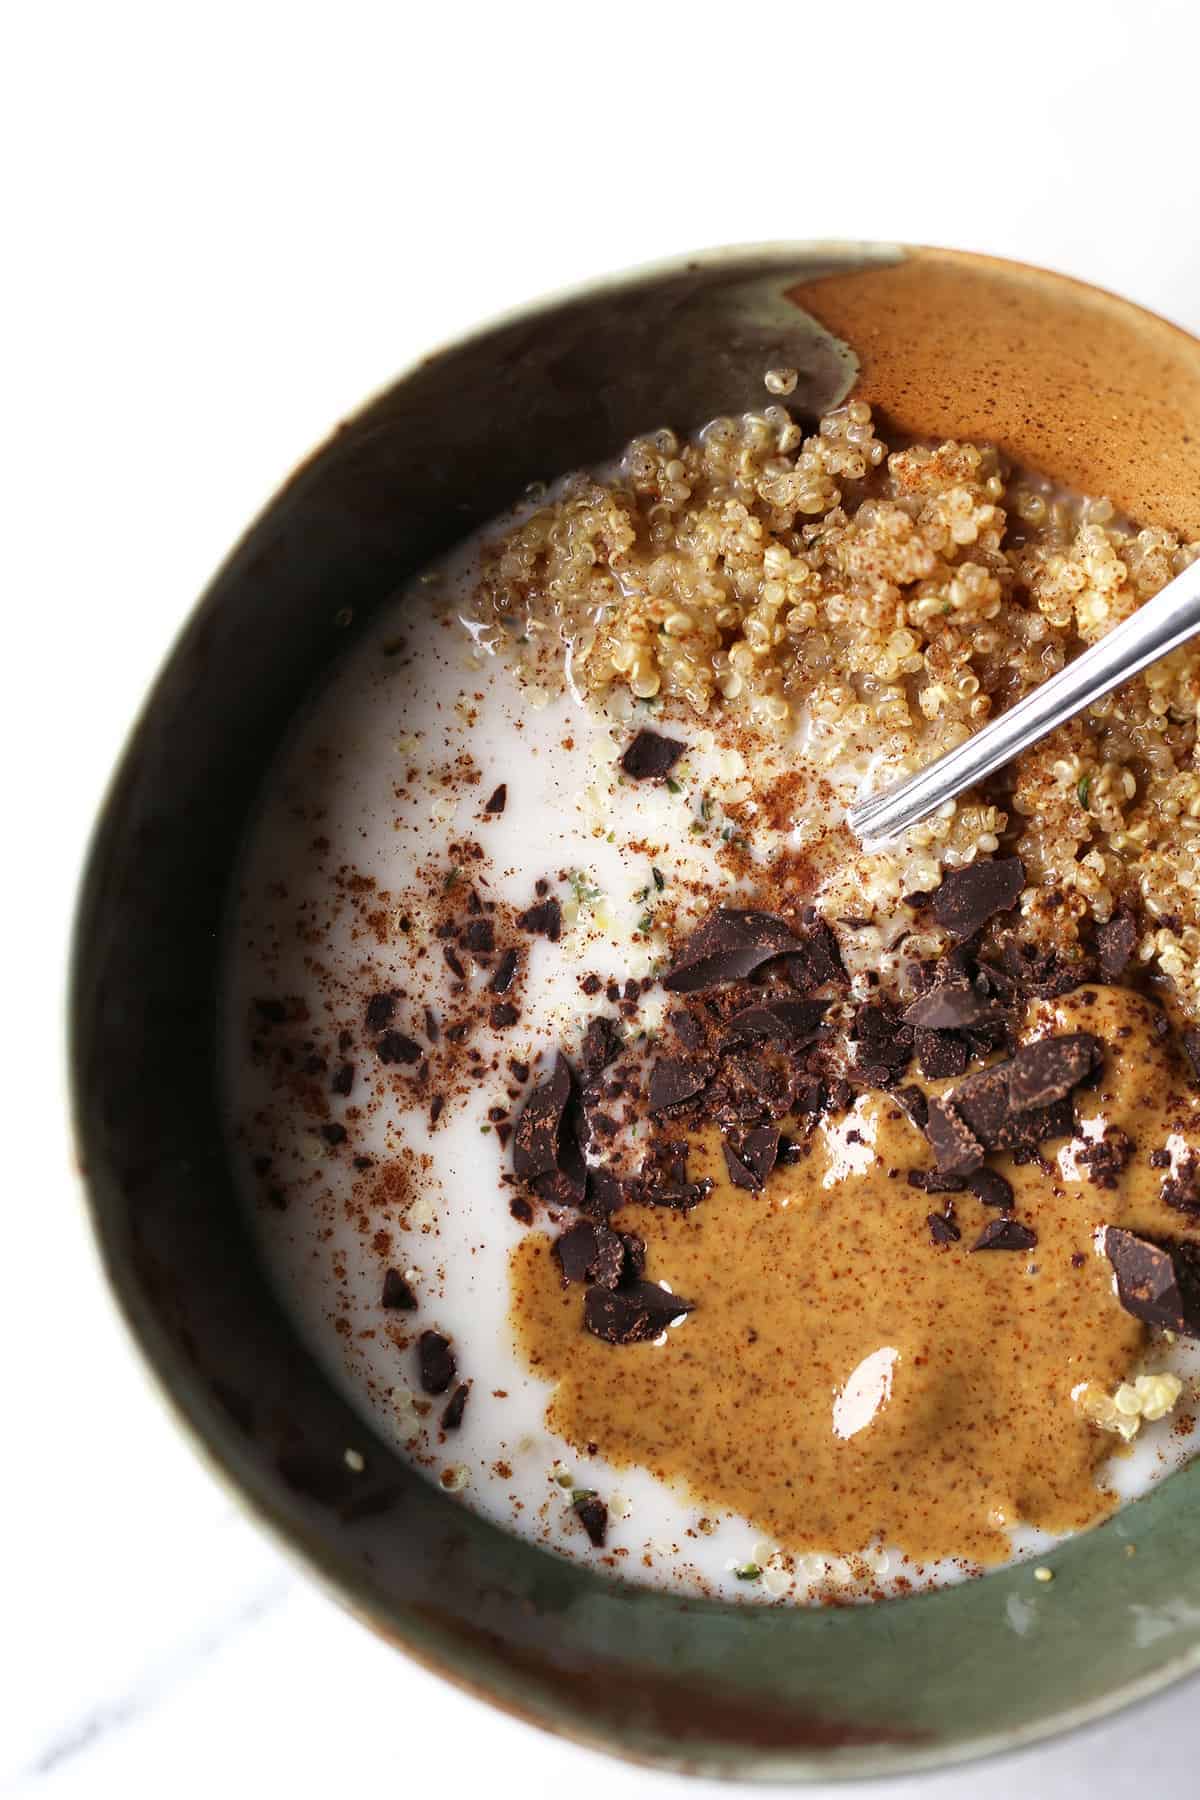 Quinoa breakfast bowl topped with chocolate and nut butter.